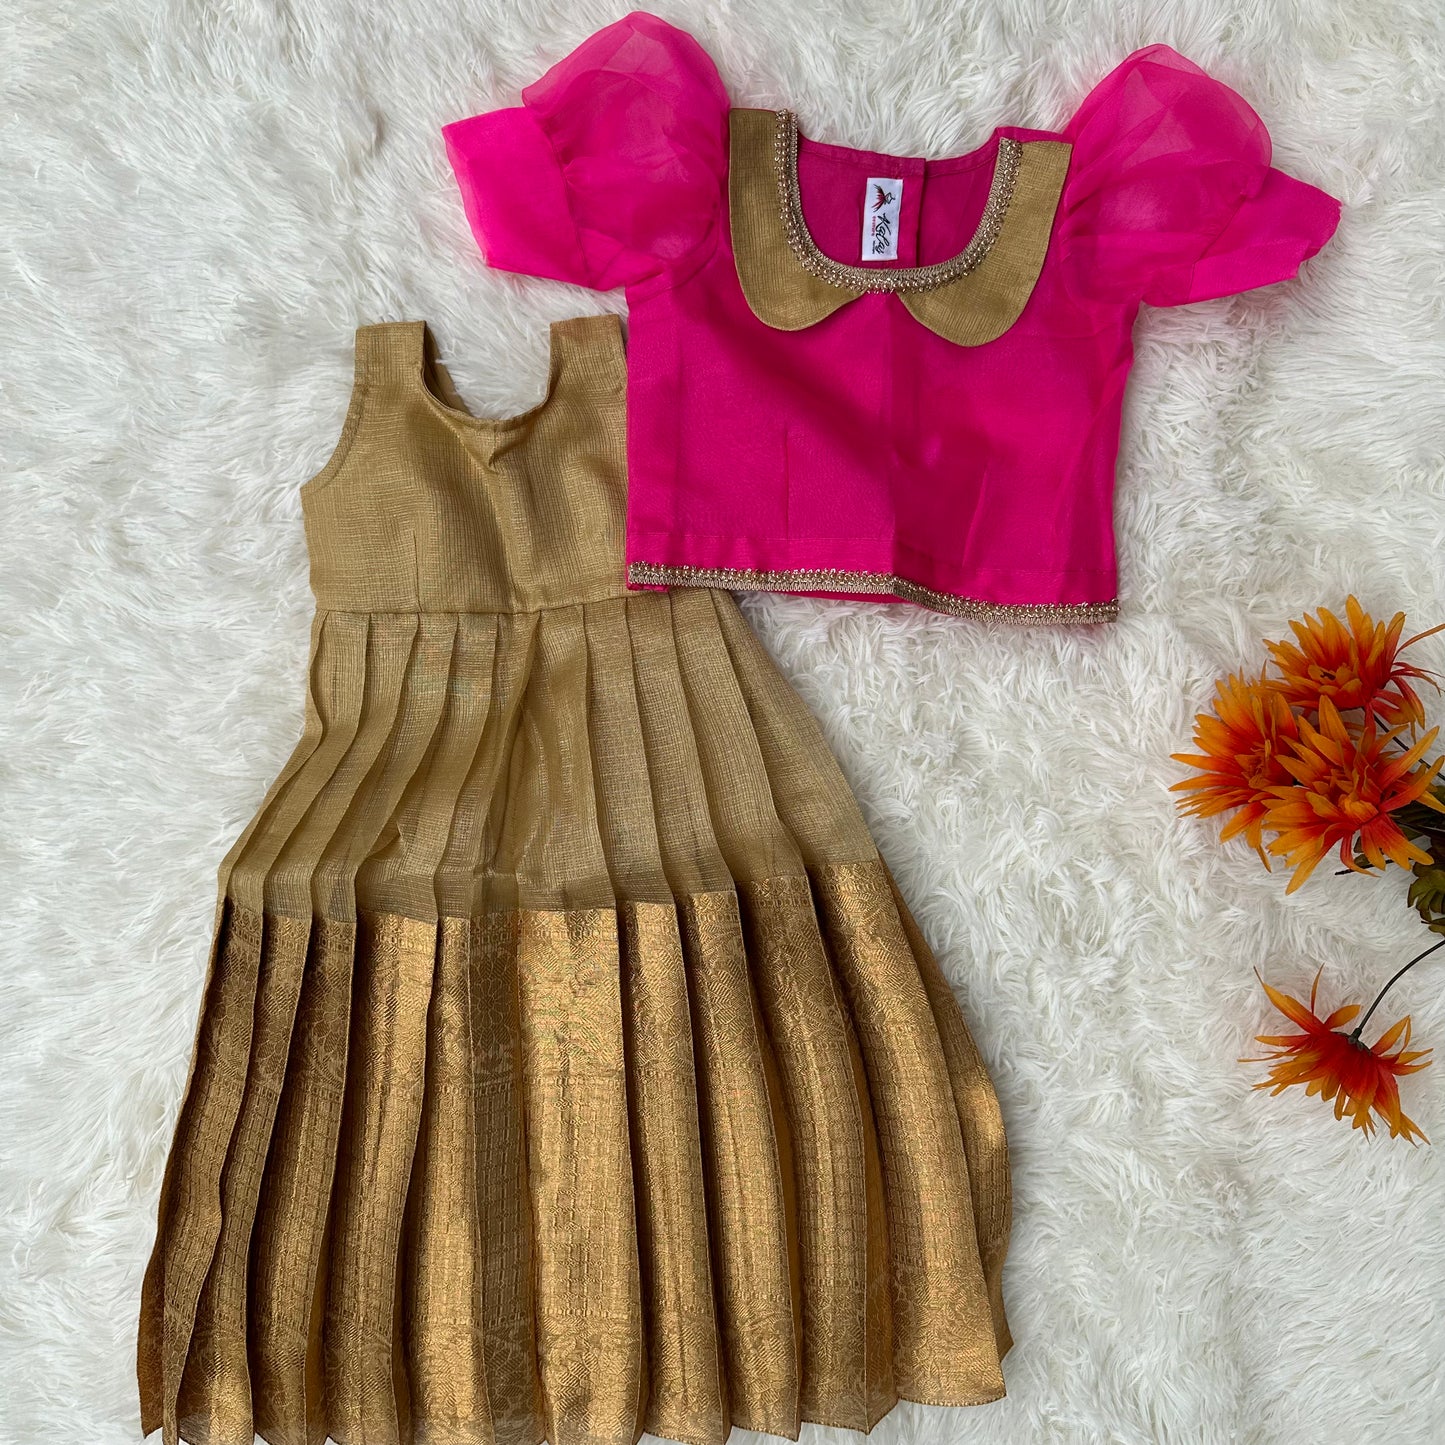 Golden Grace: Tissue Frock and Pink Top Ensemble